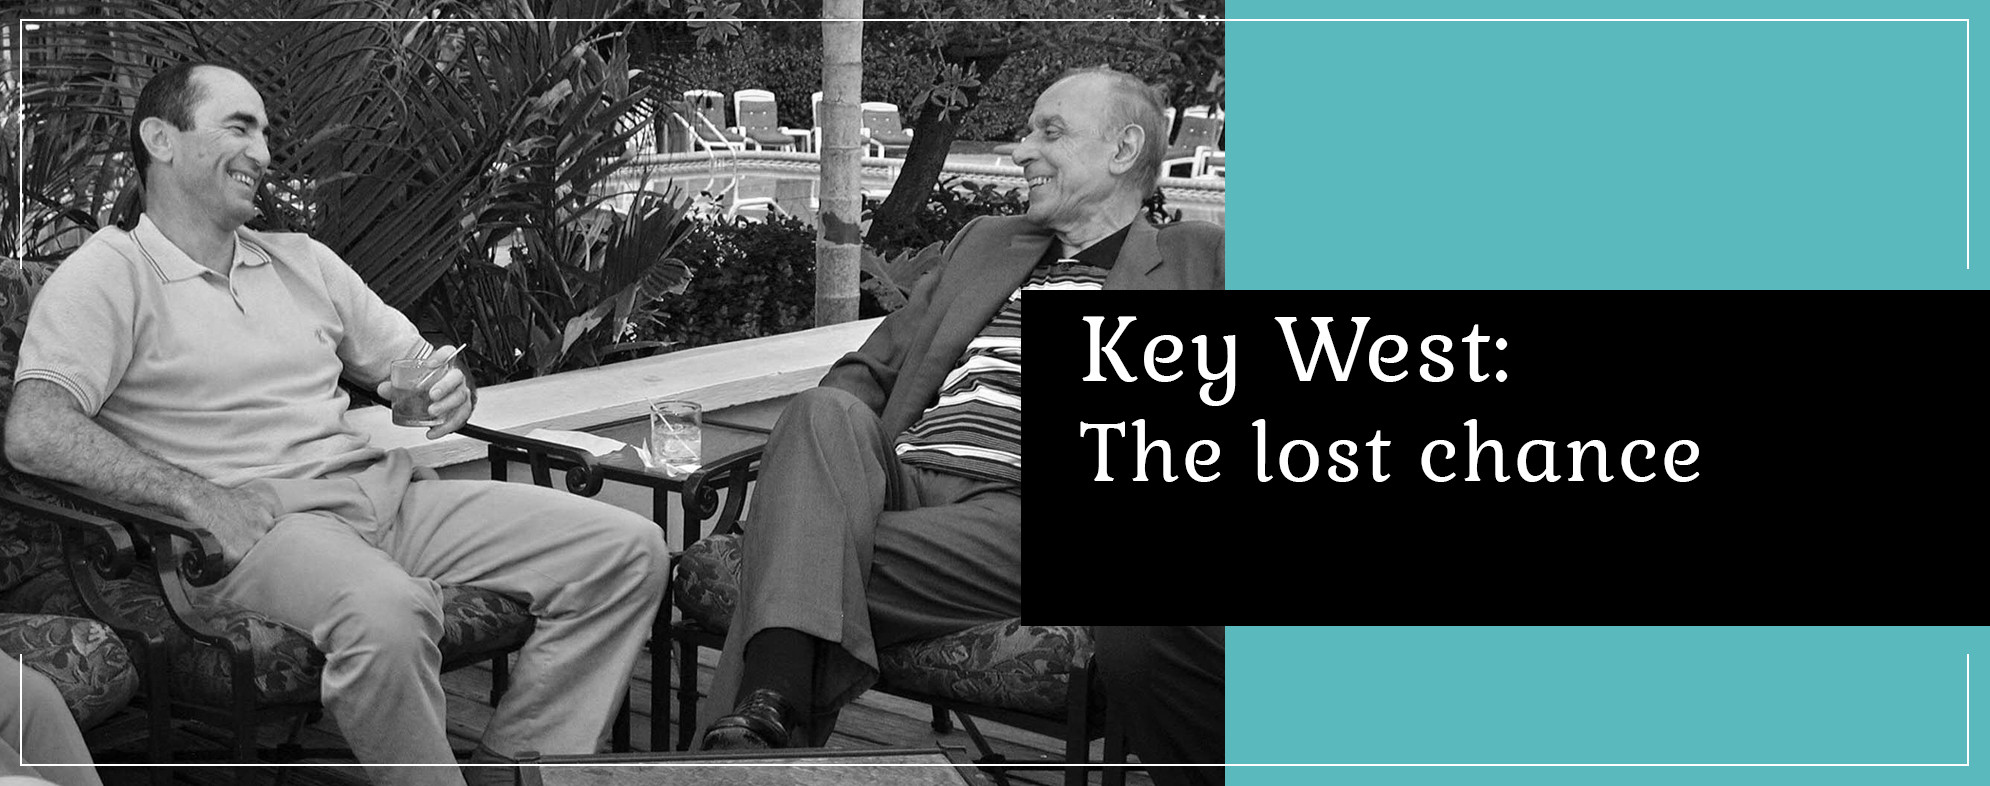 Key West: The lost chance